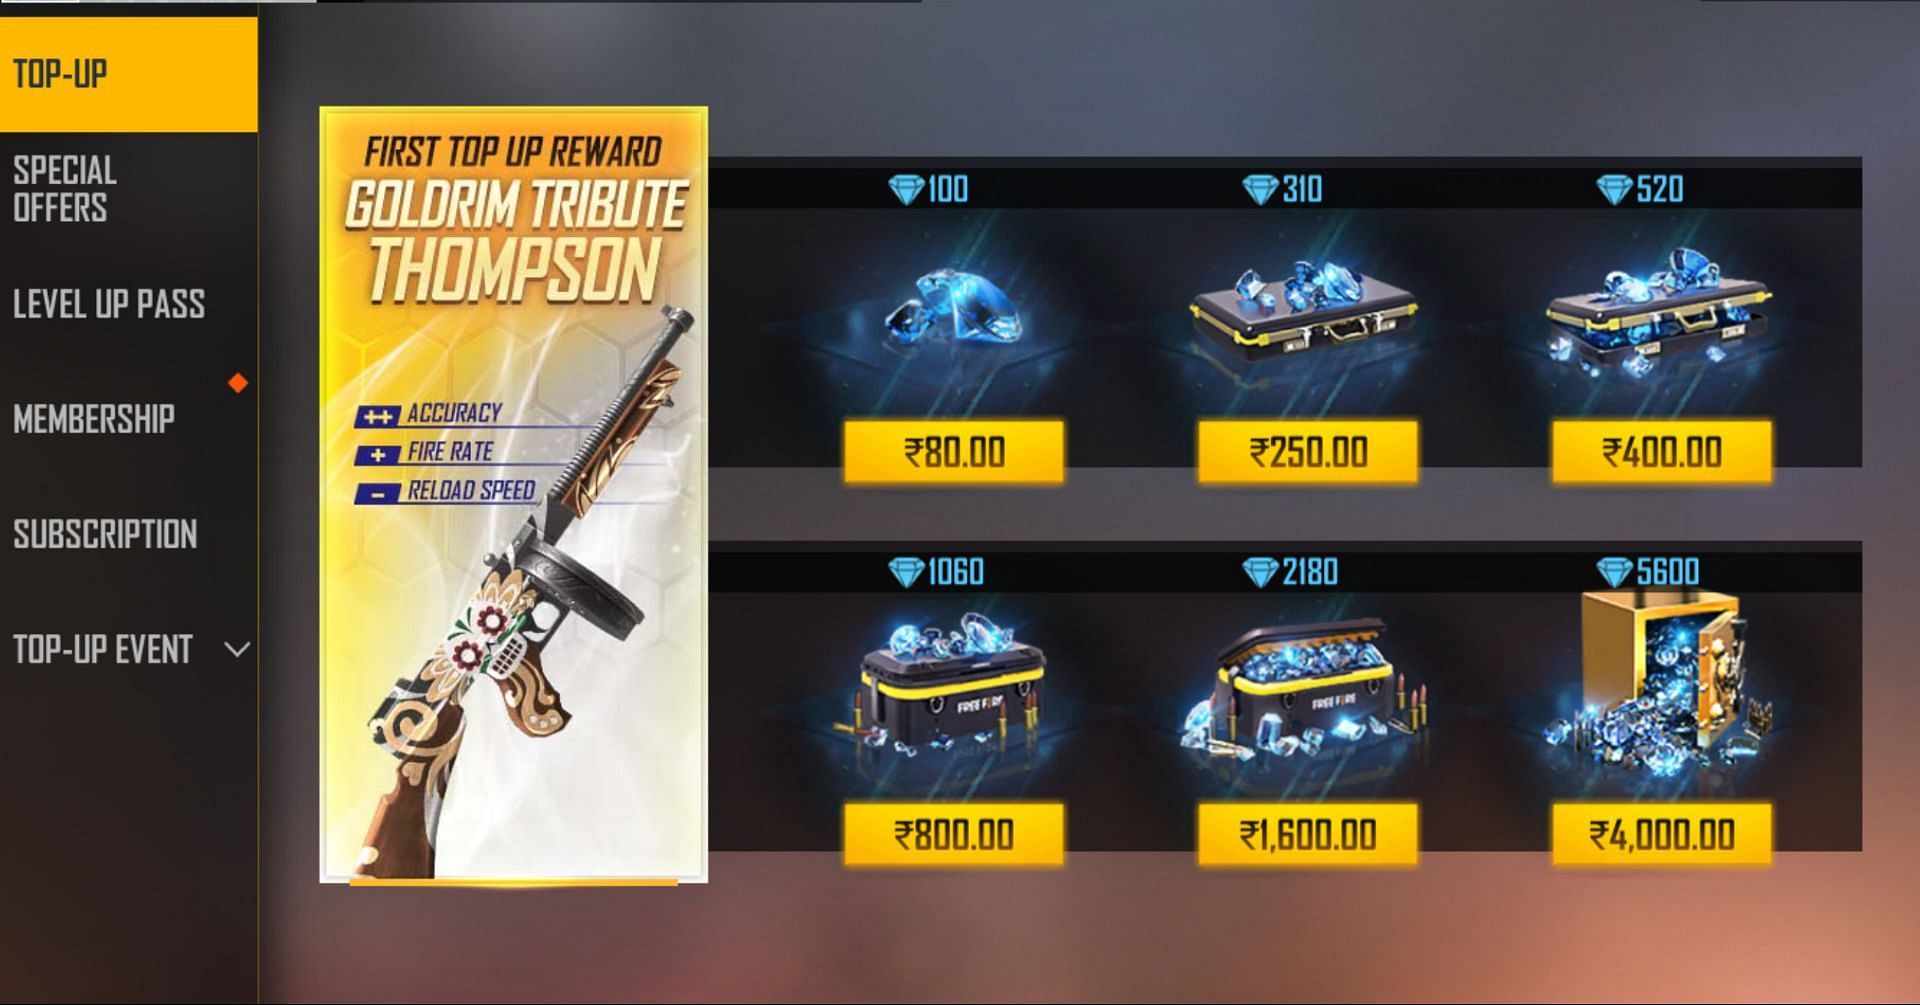 The in-game top-up center has several options (Image via Garena)